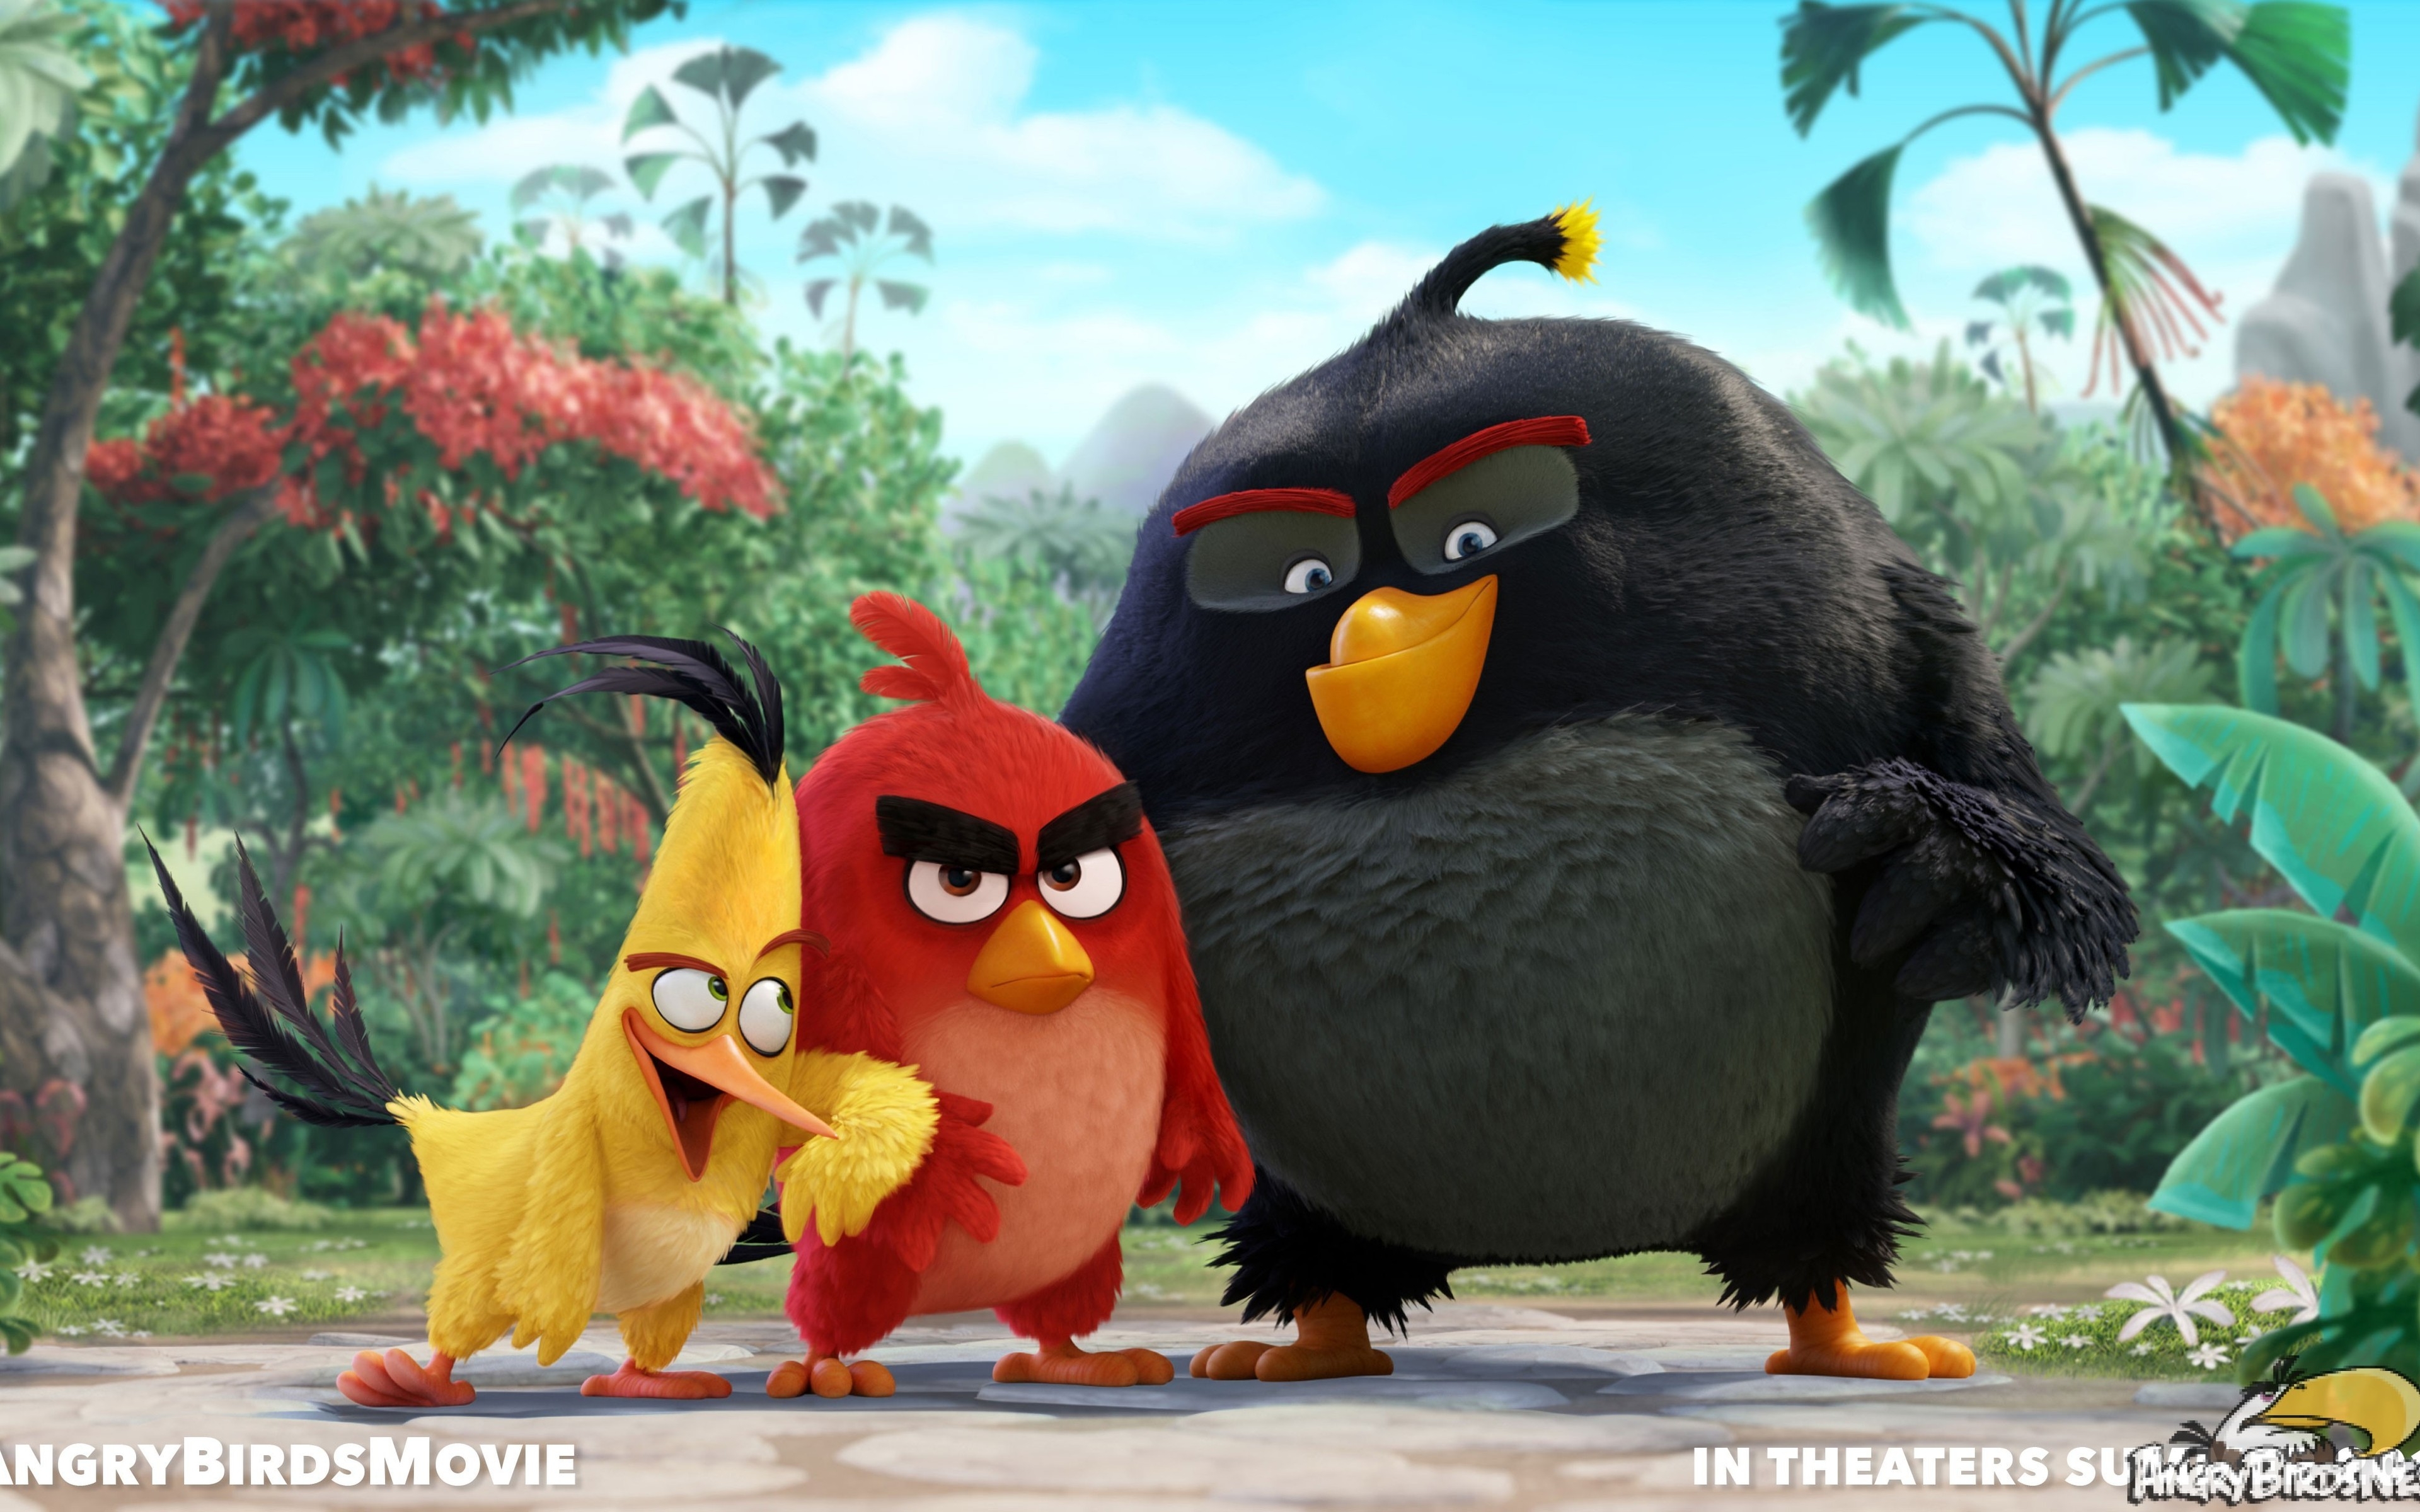 Angry Birds Movie for 3840 x 2400 Widescreen resolution